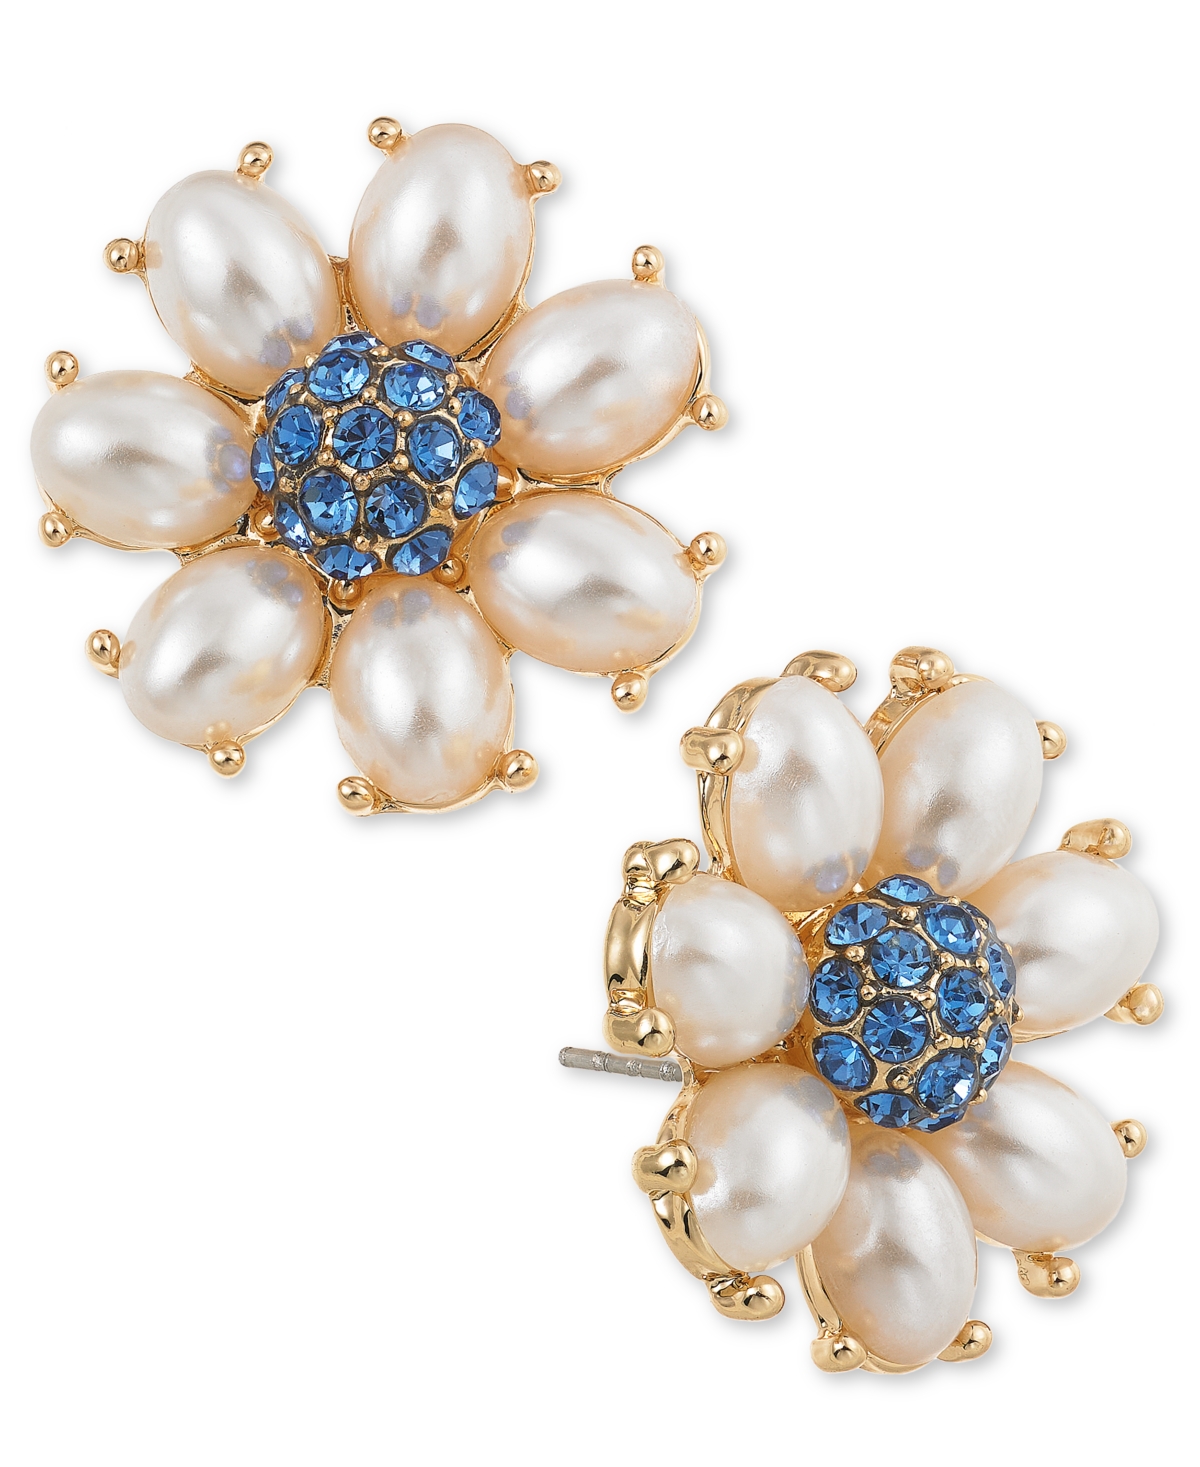 Gold-Tone Color Pave & Imitation Pearl Flower Stud Earrings, Created for Macy's - Pink